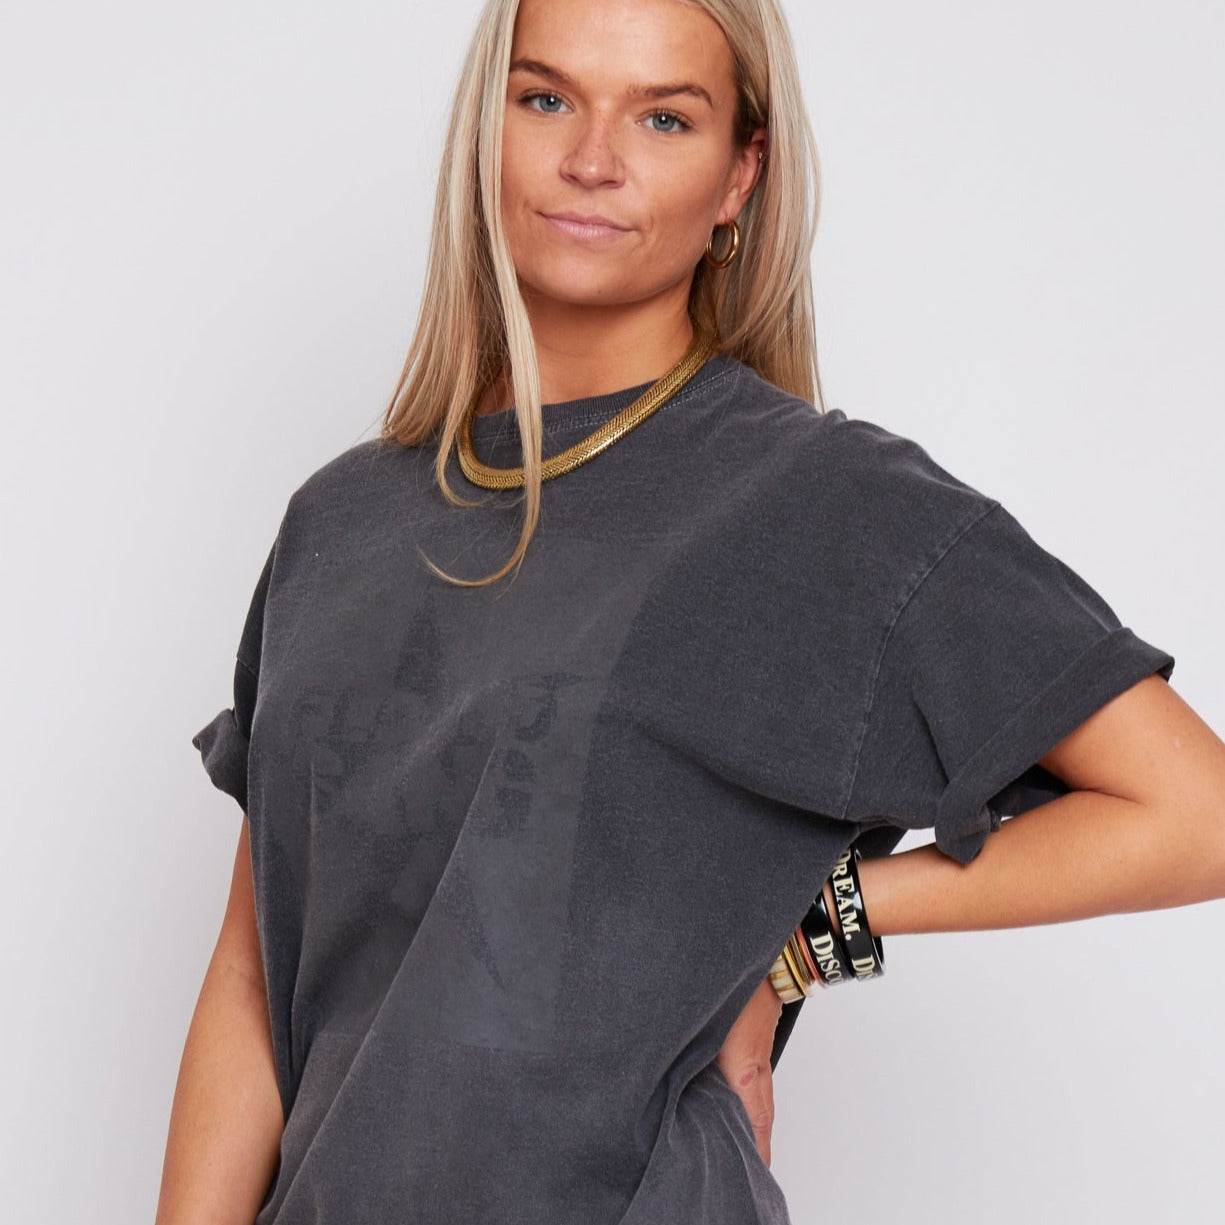 Oversized Charcoal Dean Tee